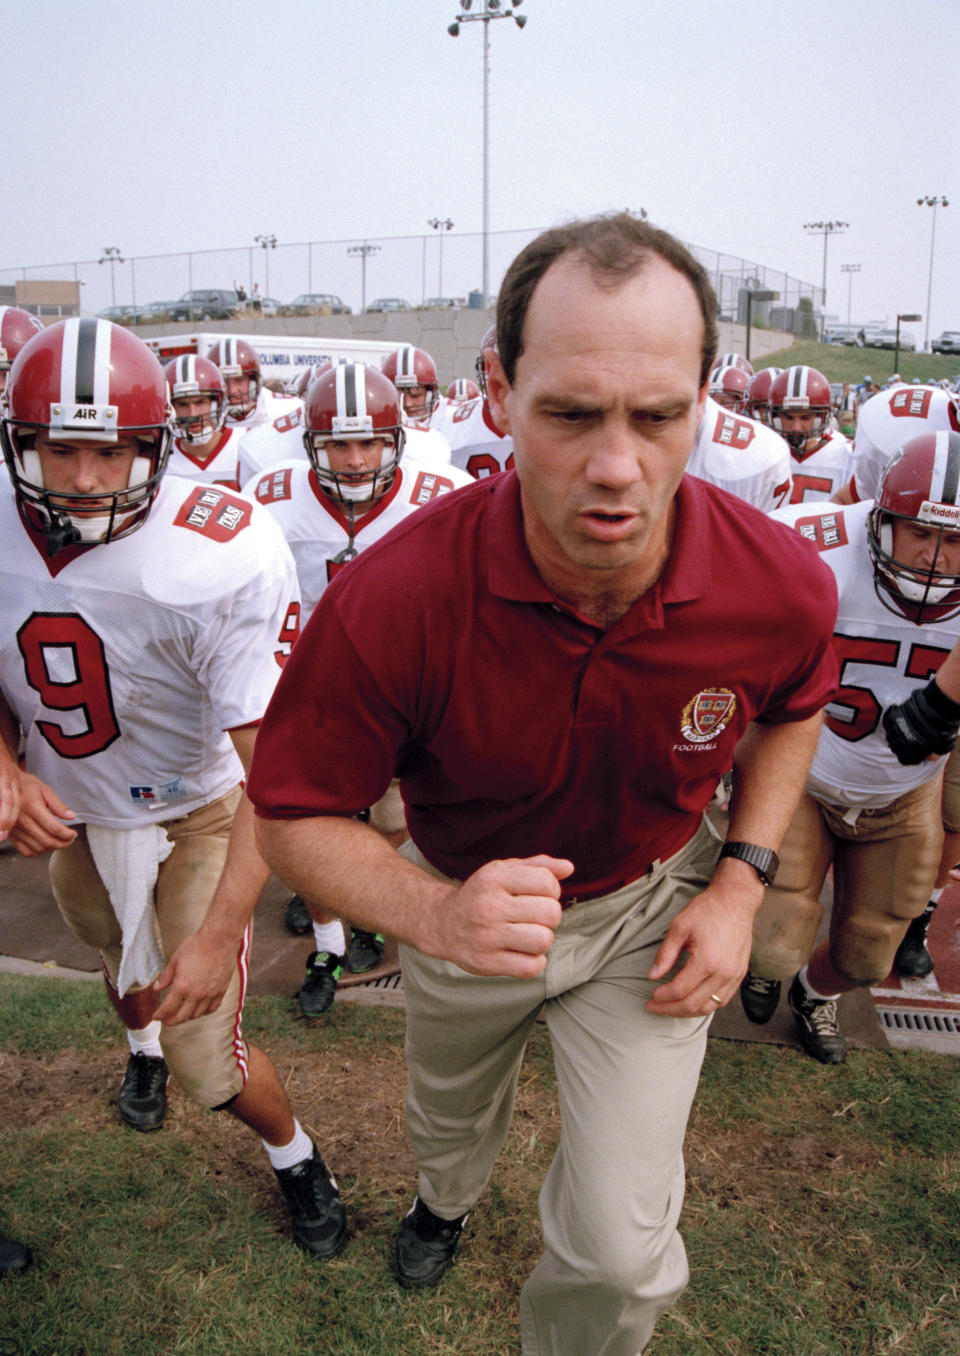 Harvard head coach Tim Murphy leads the Crimson onto Baker Field in New York to face Columbia, Saturday, Sept. 17, 1994. It is the Ivy League opener for Harvard's first year coach. (AP Photo/Eric Miller)